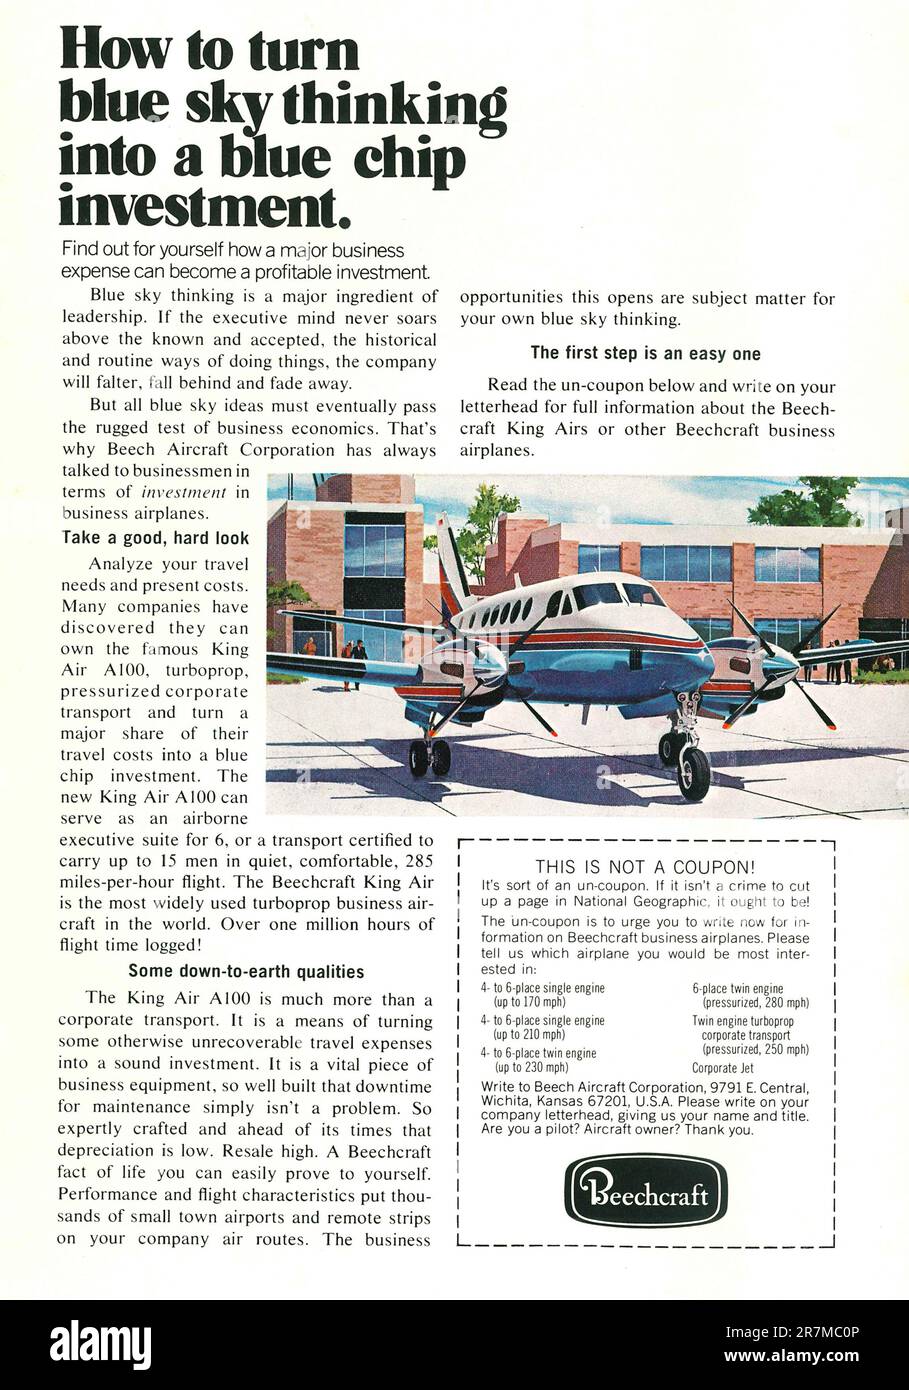 Beechcraft King Air private jet, executive jets advertisement placed inside NatGeo magazine, 1972 Stock Photo